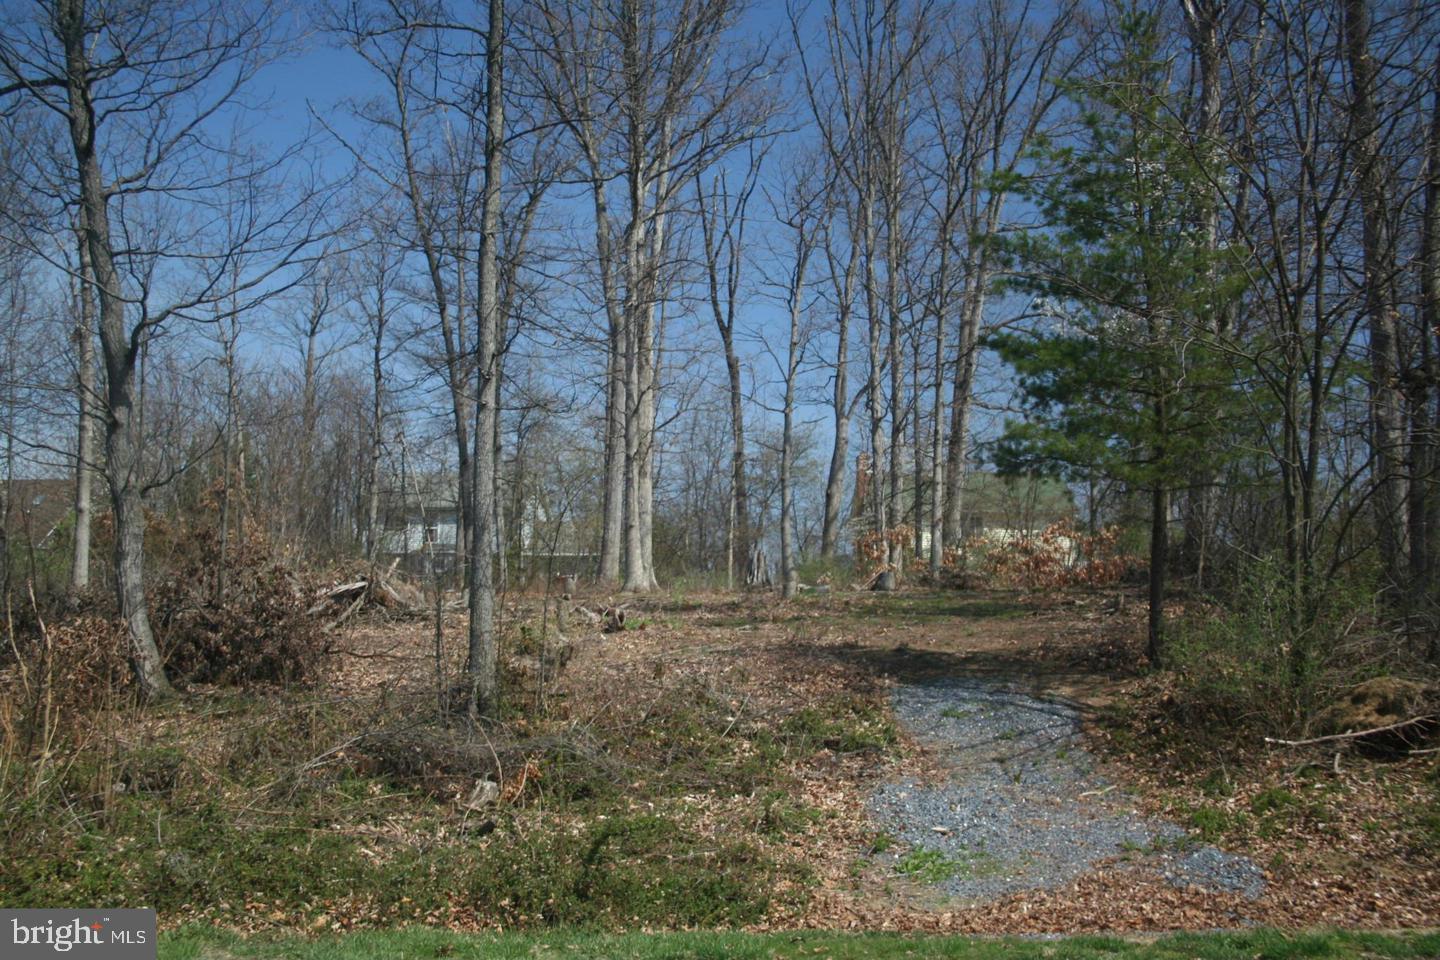 a view of a yard with trees in the background